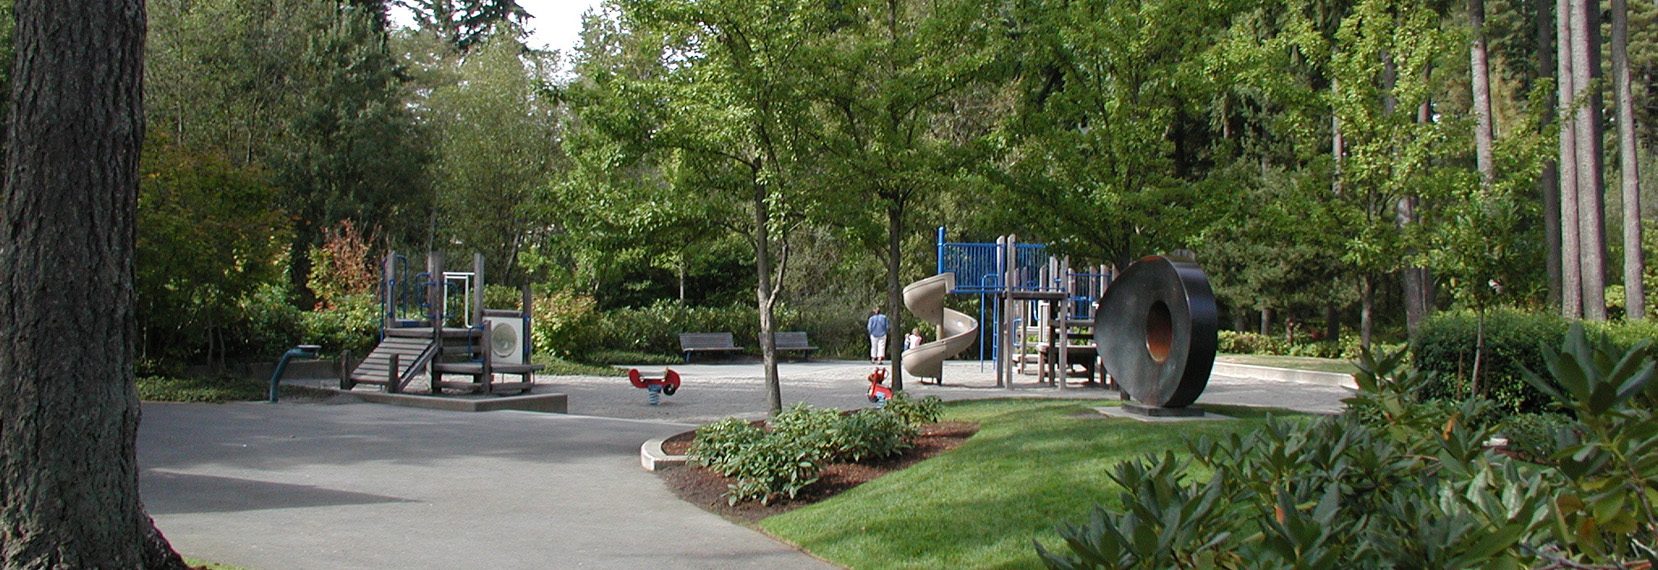 mill creek park with sculpture & playground equipment